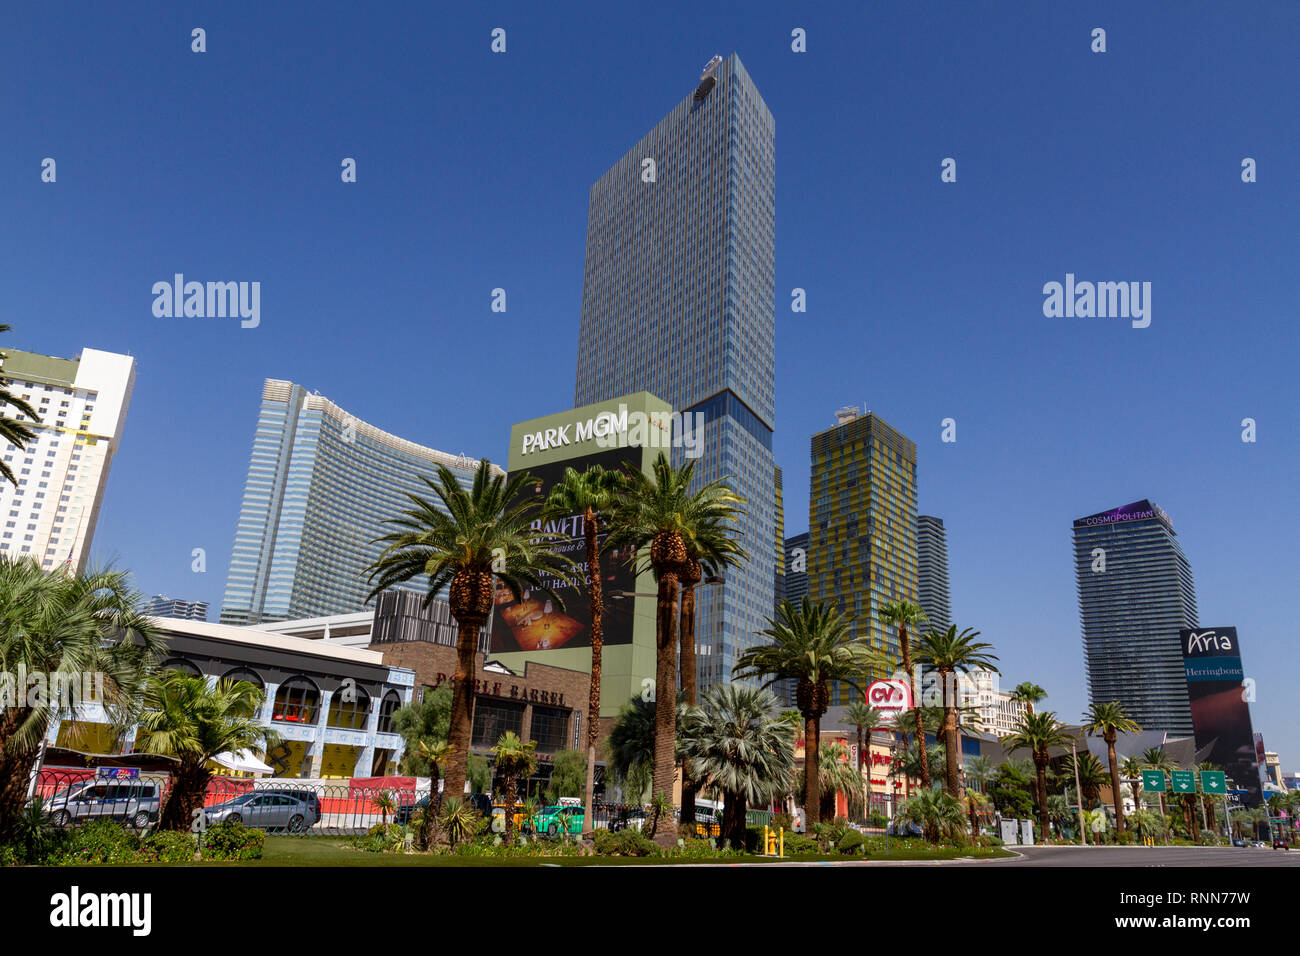 Looking up at part of The Strip (inc the Mandarin Oriental and Cosmopolitan hotels), Las Vegas, Nevada, United States. Stock Photo